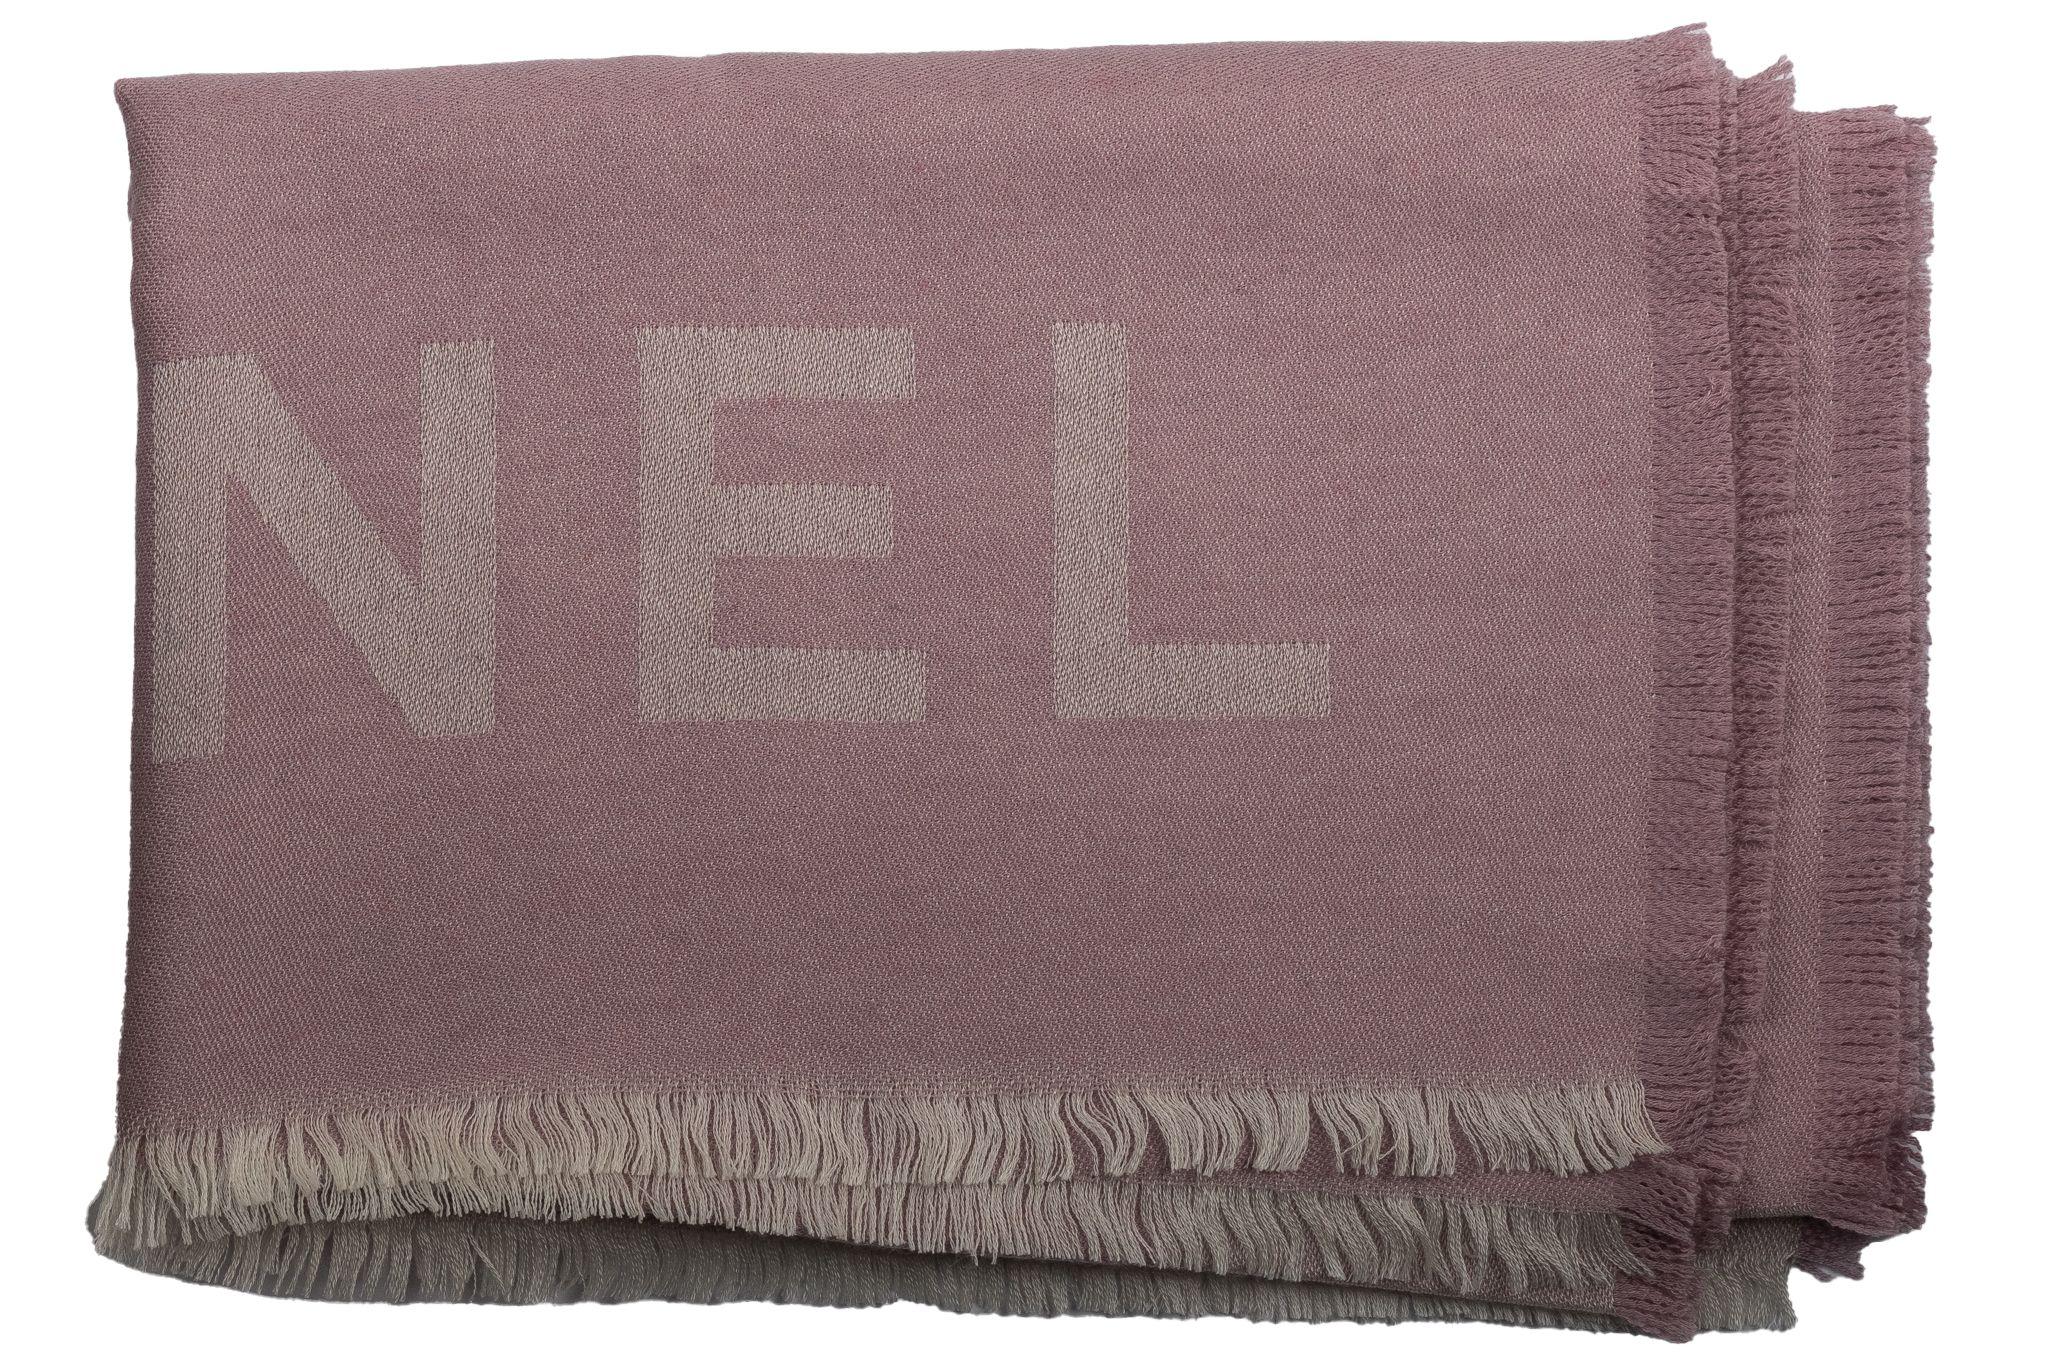 Chanel New Cashmere Shawl in Rosé In Excellent Condition For Sale In West Hollywood, CA